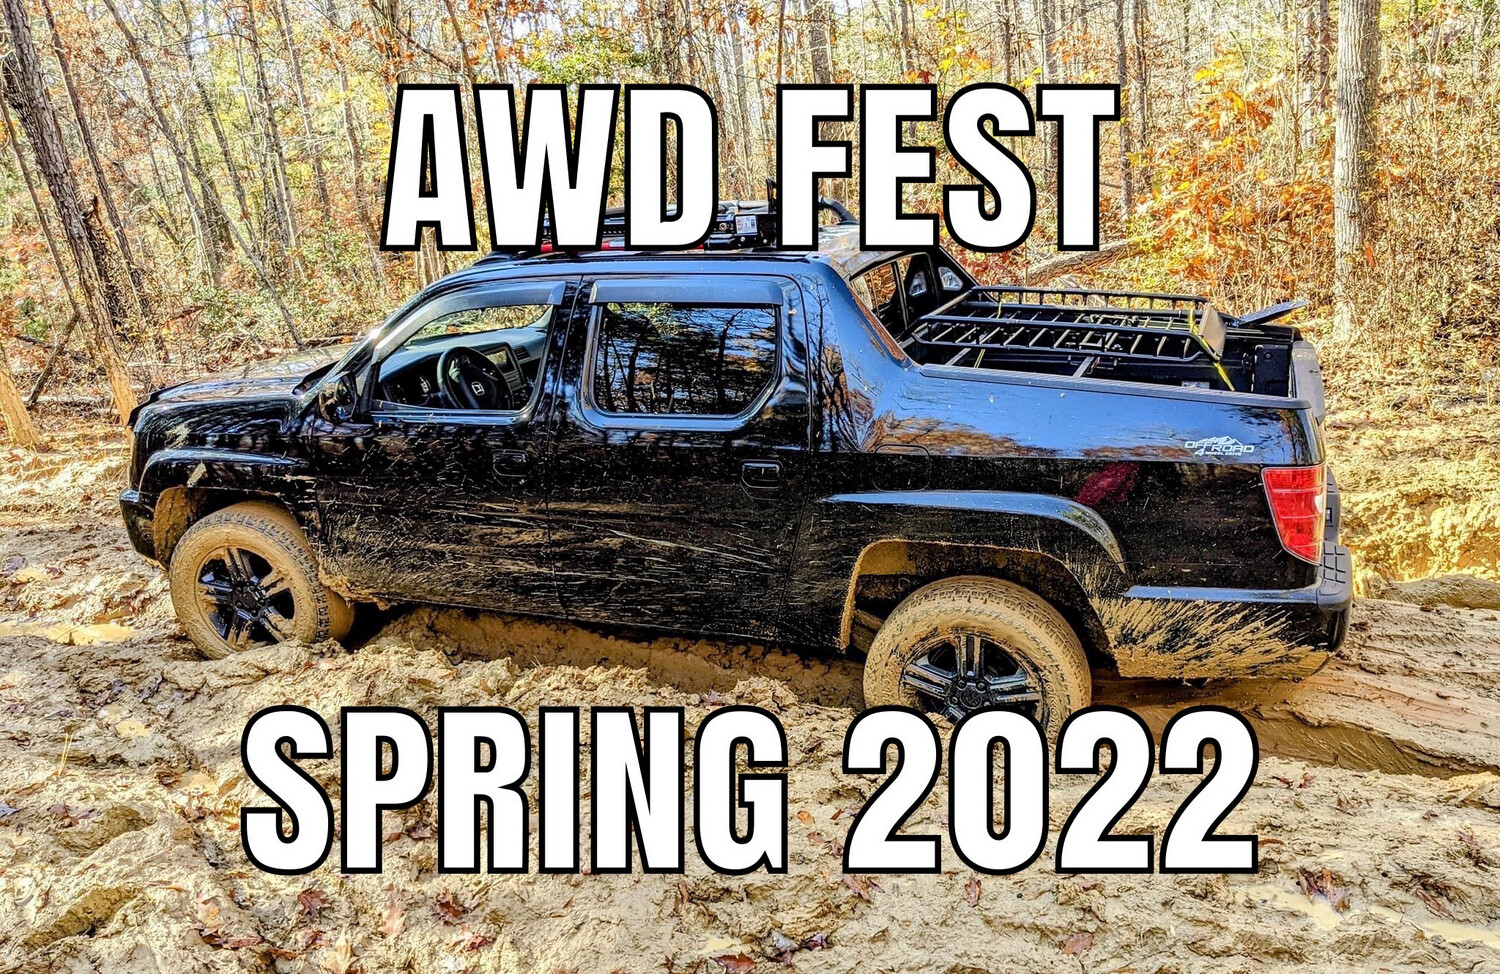 AWDFEST SPRING 2022 CAMPING Ticket